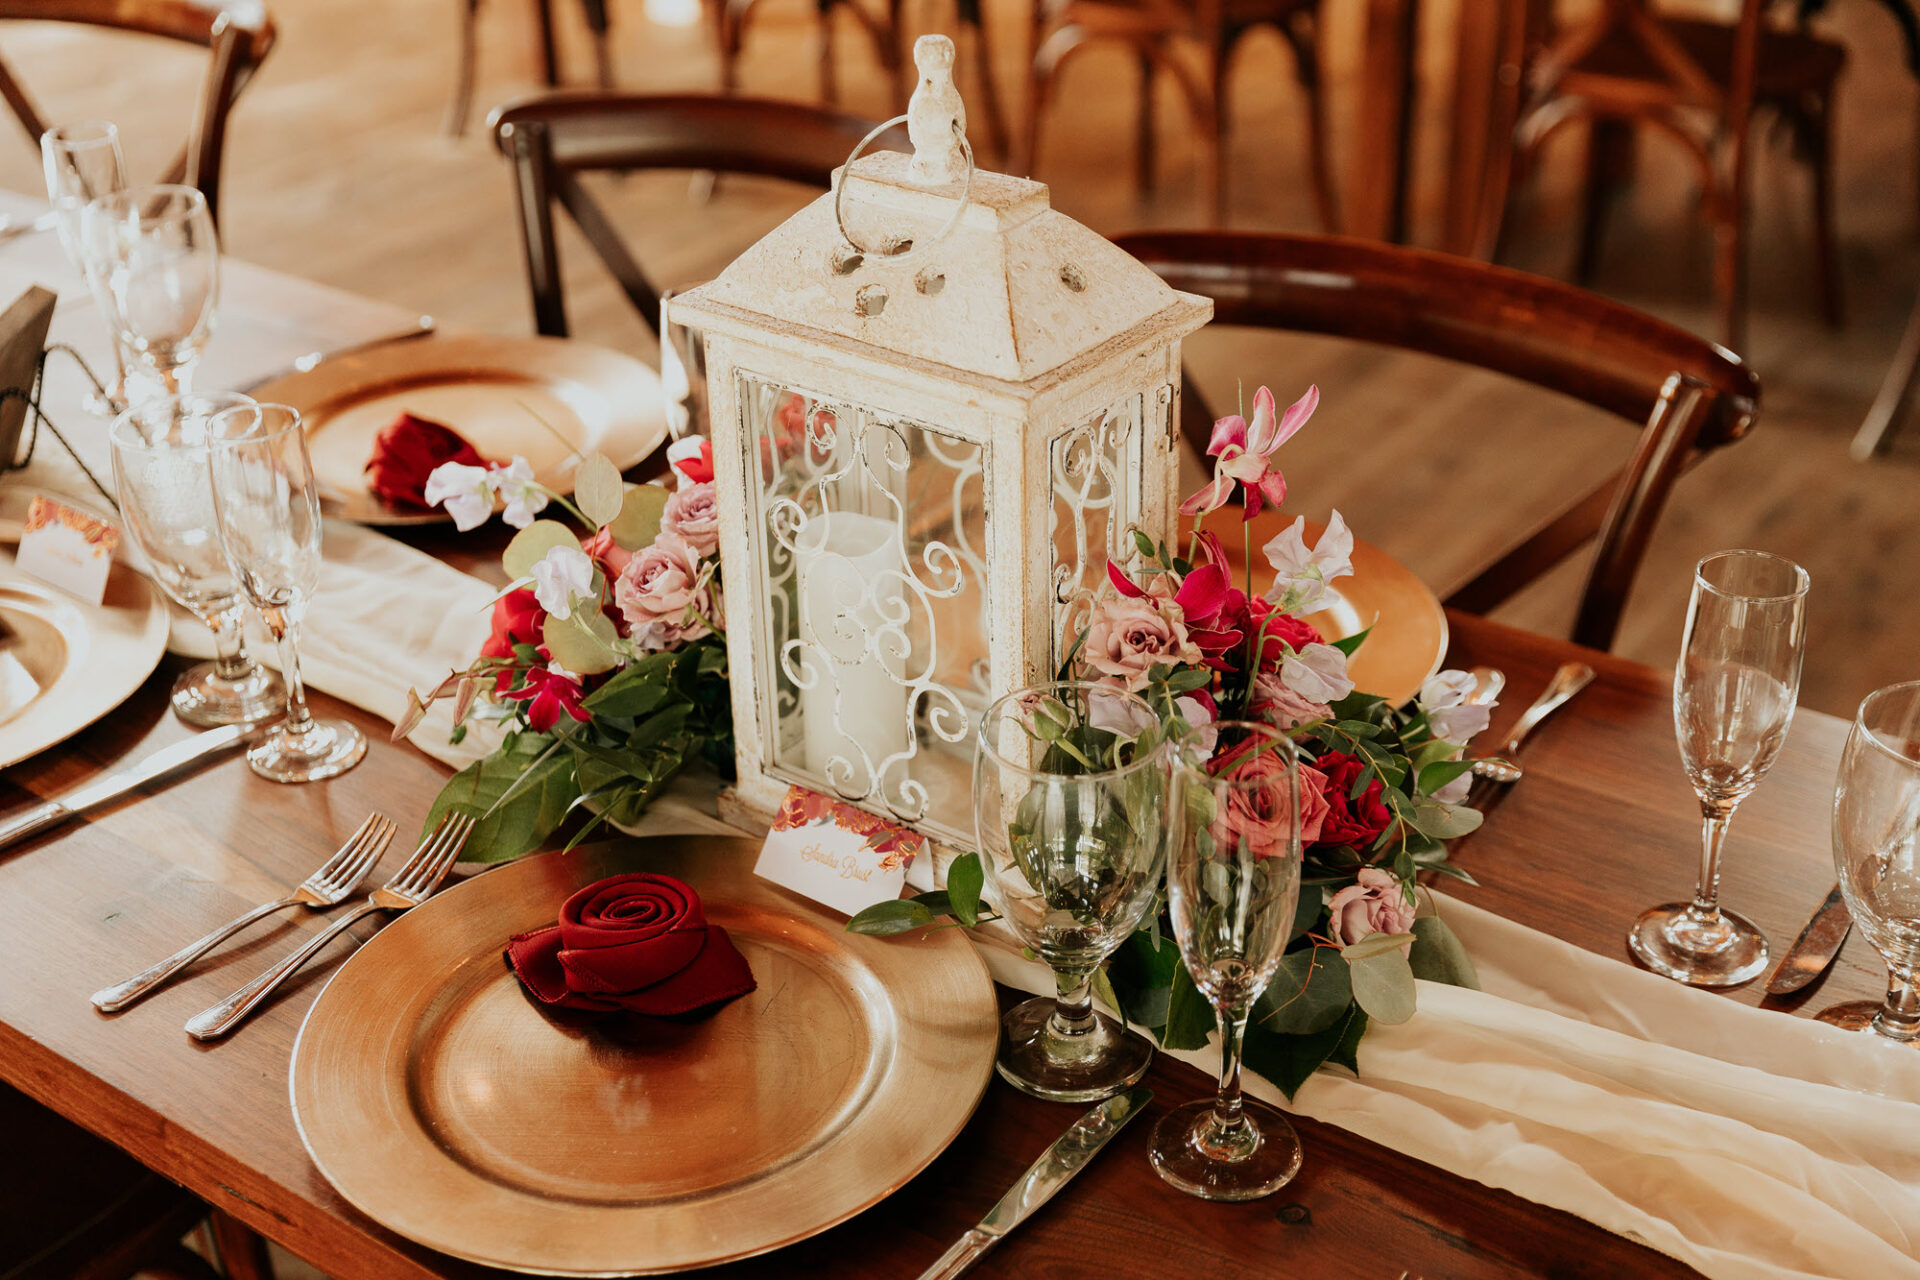 Featured image for “Elegant Table Decorations for Your Northern Virginia Wedding”